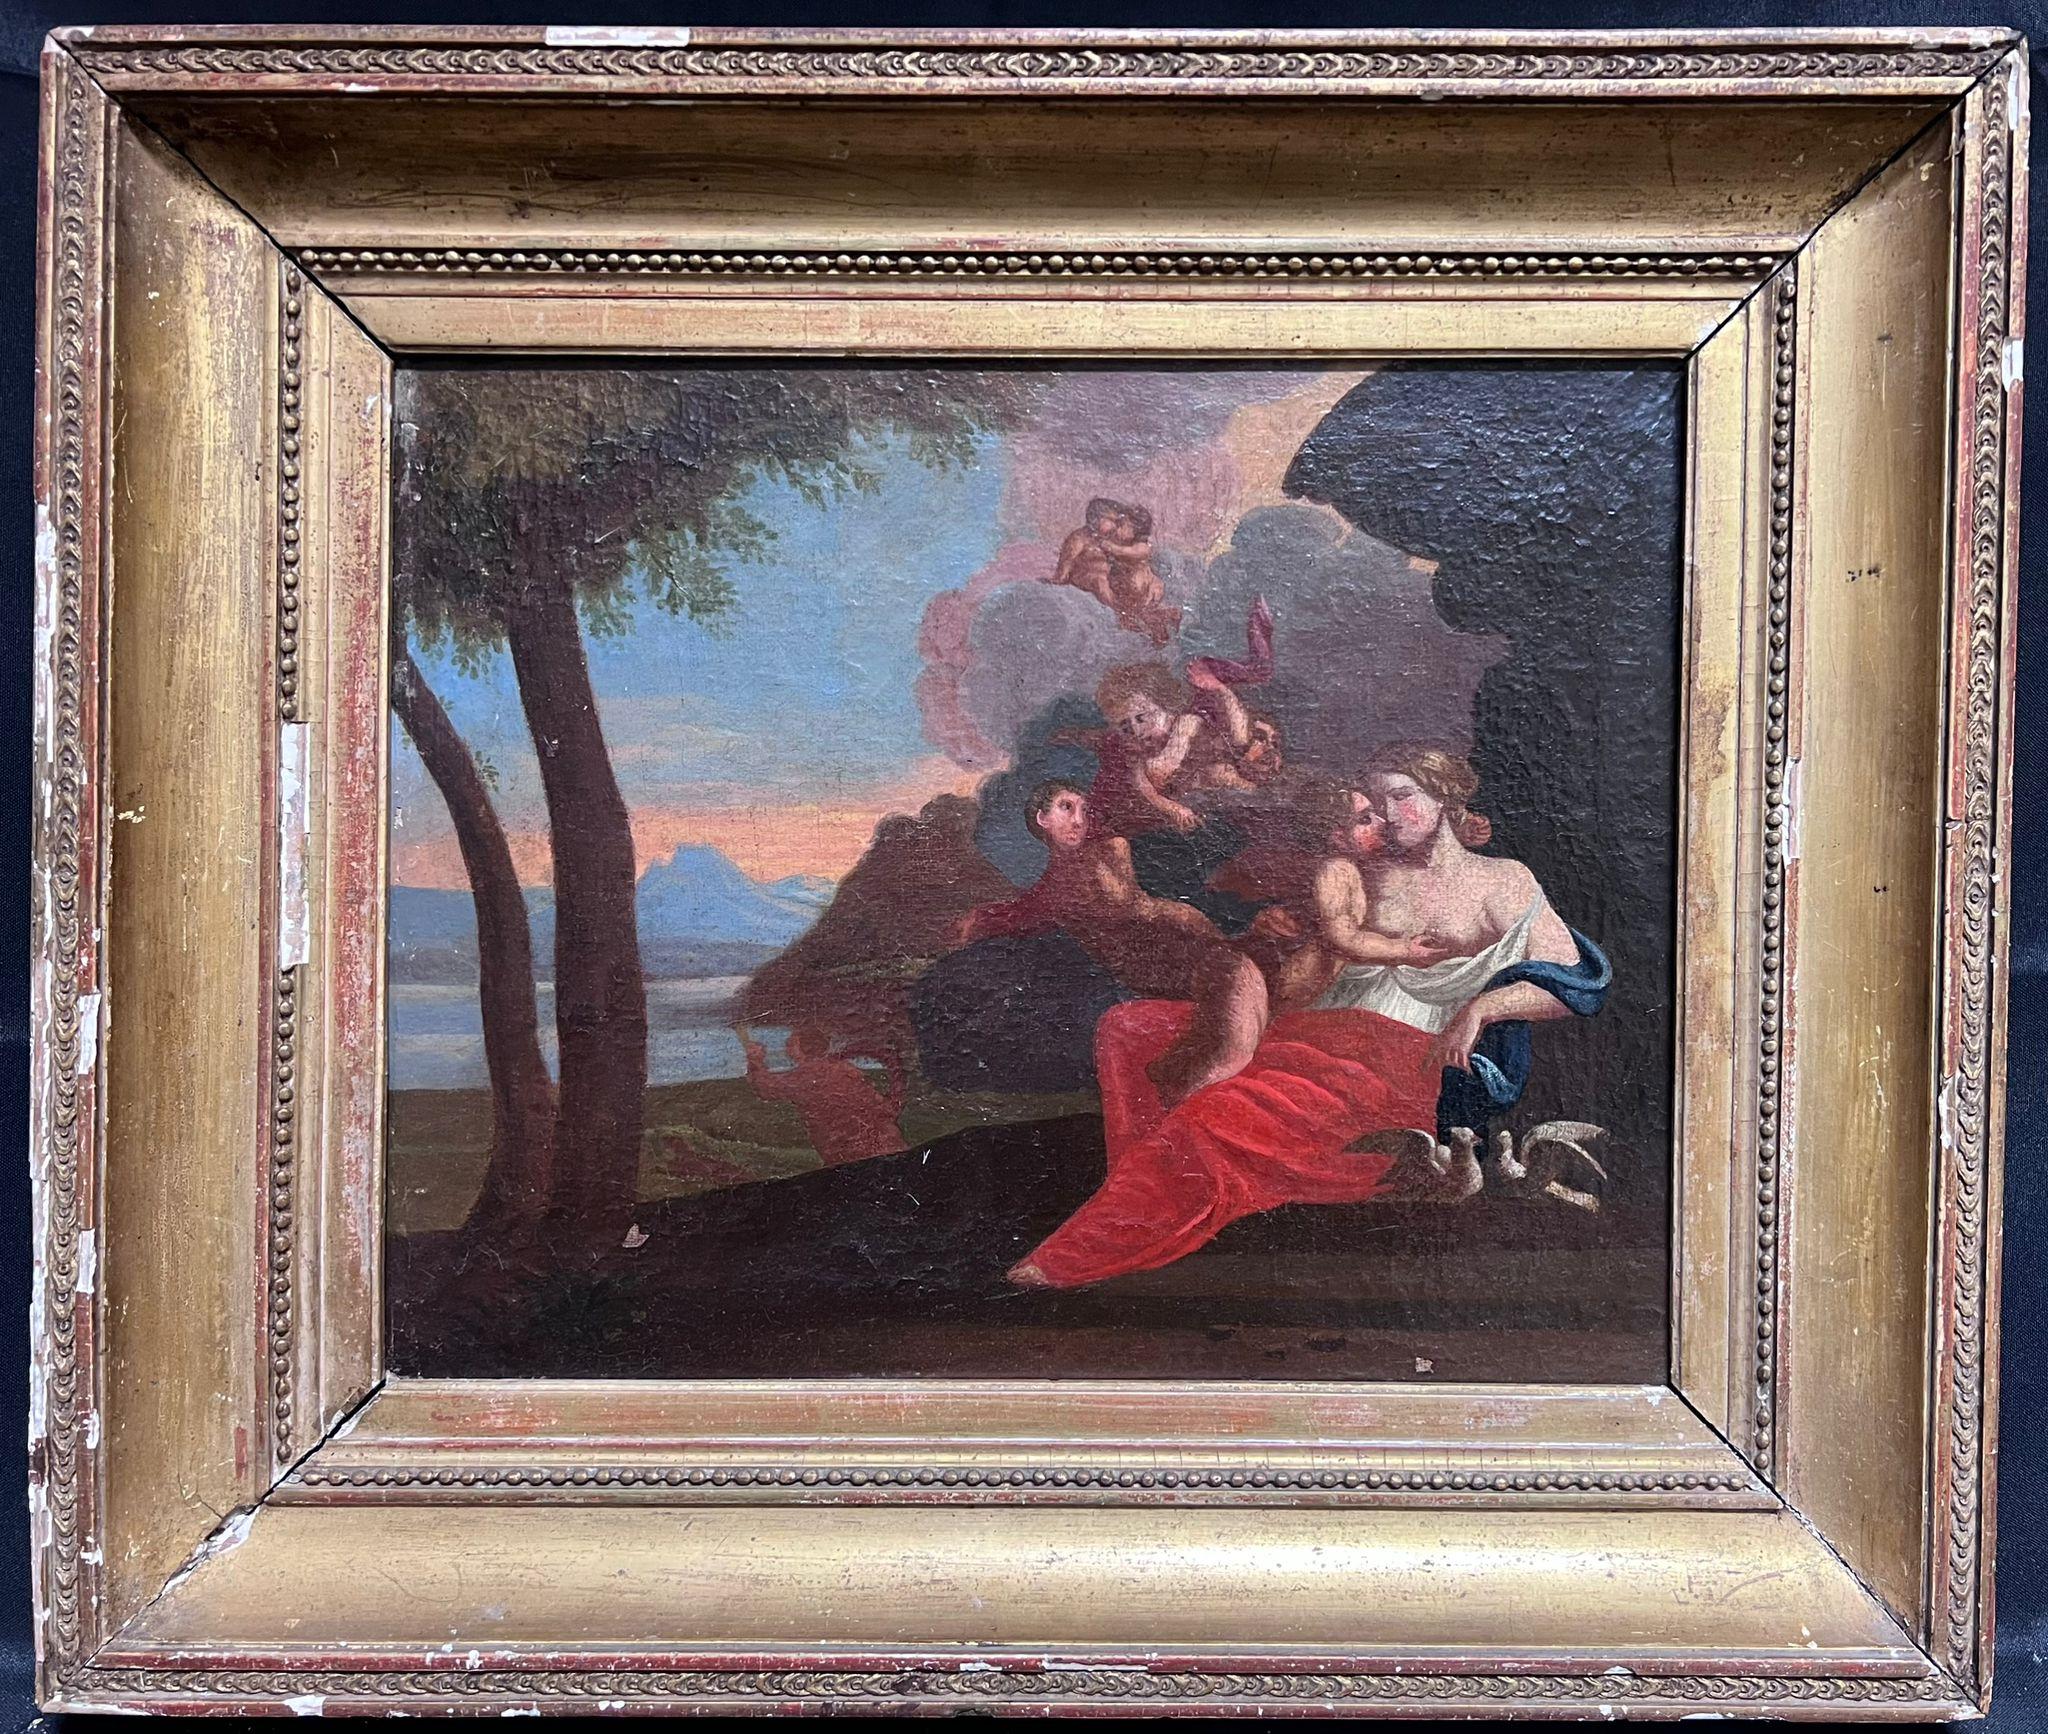 Mythological Figures in Classical Sunset Landscape
French School, 17th century
oil on canvas, framed
framed: 20 x 23.5
painting: 13.5 x 17 inches
provenance: private collection, England
condition: very good and sound condition; the frame is antique